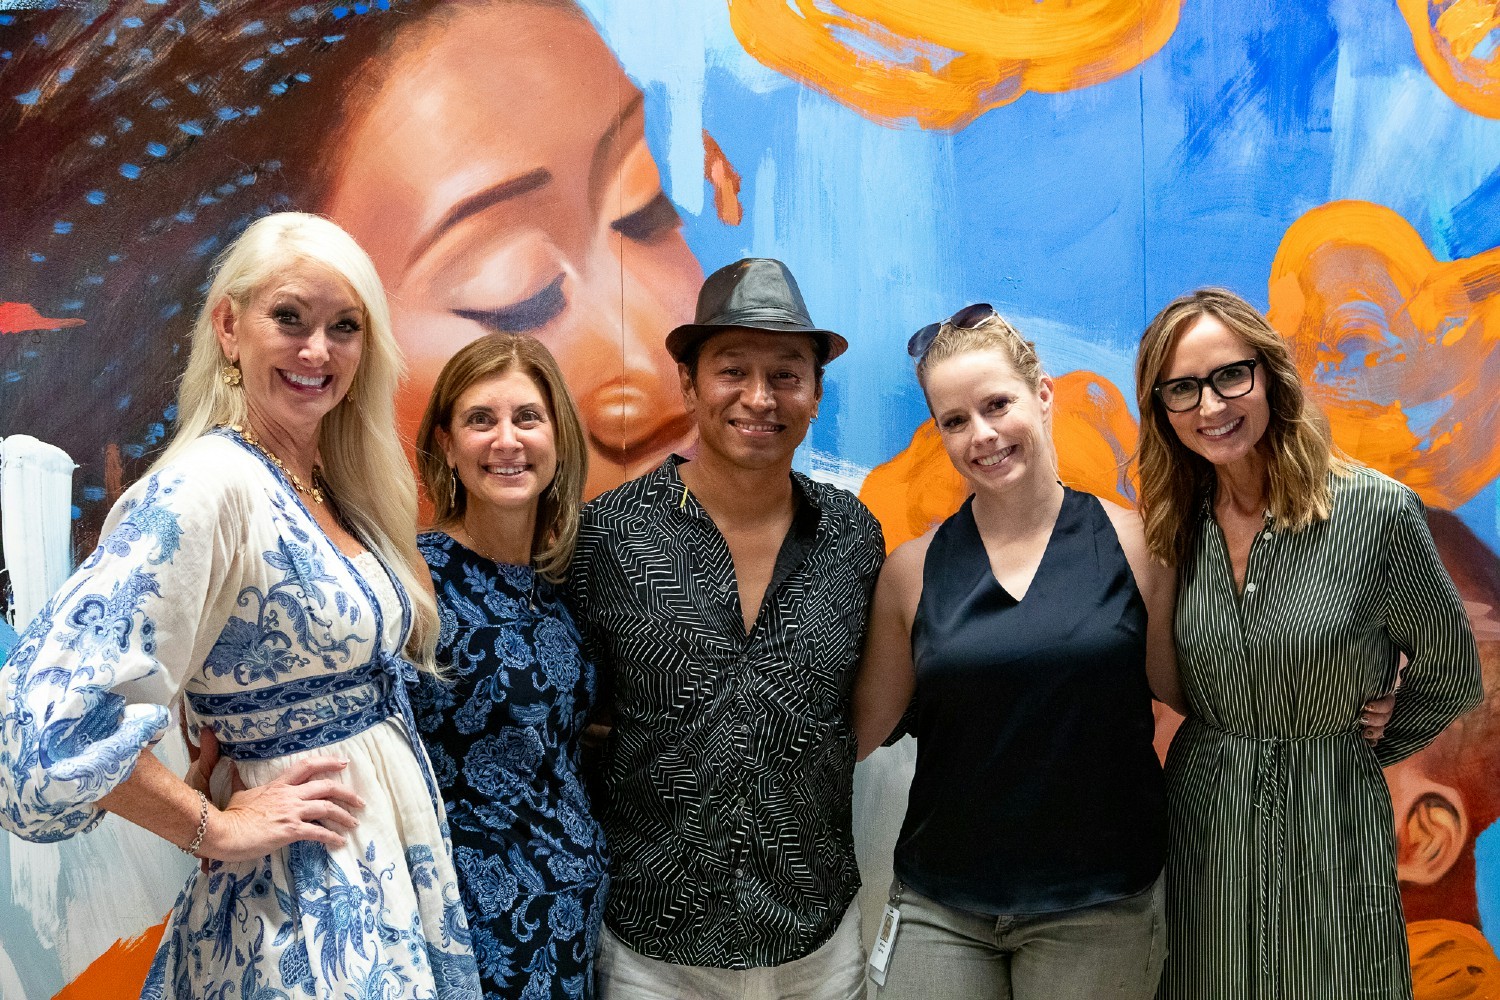 Orrick’s Art For Impact program connects local offices with community partners, using art as the catalyst